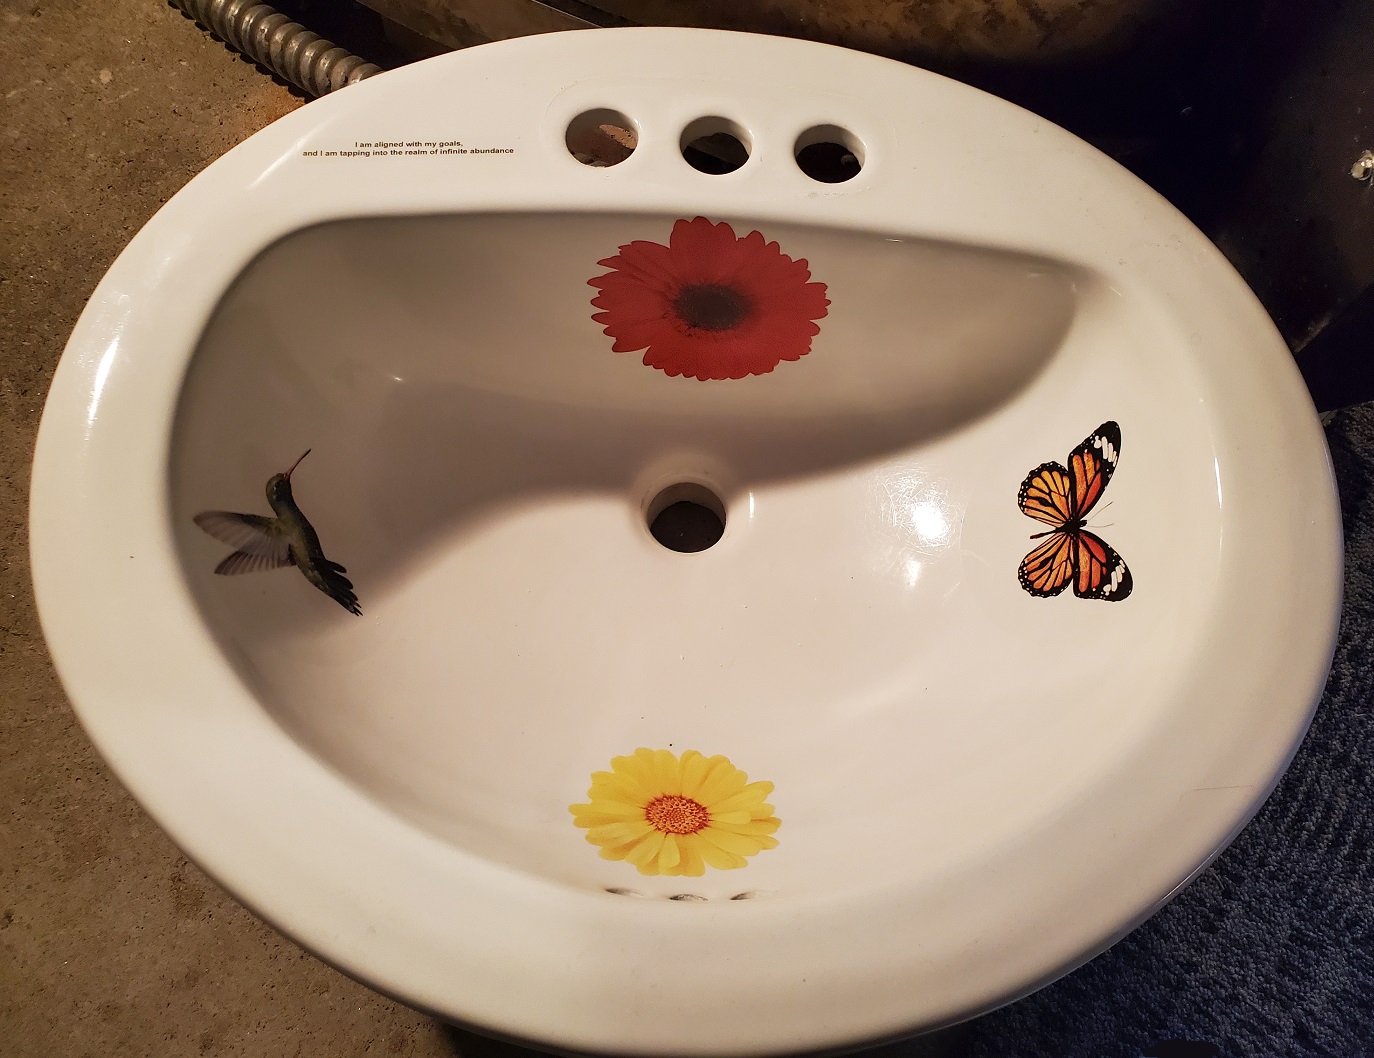 You Can Have Your Own Custom Printed Sink